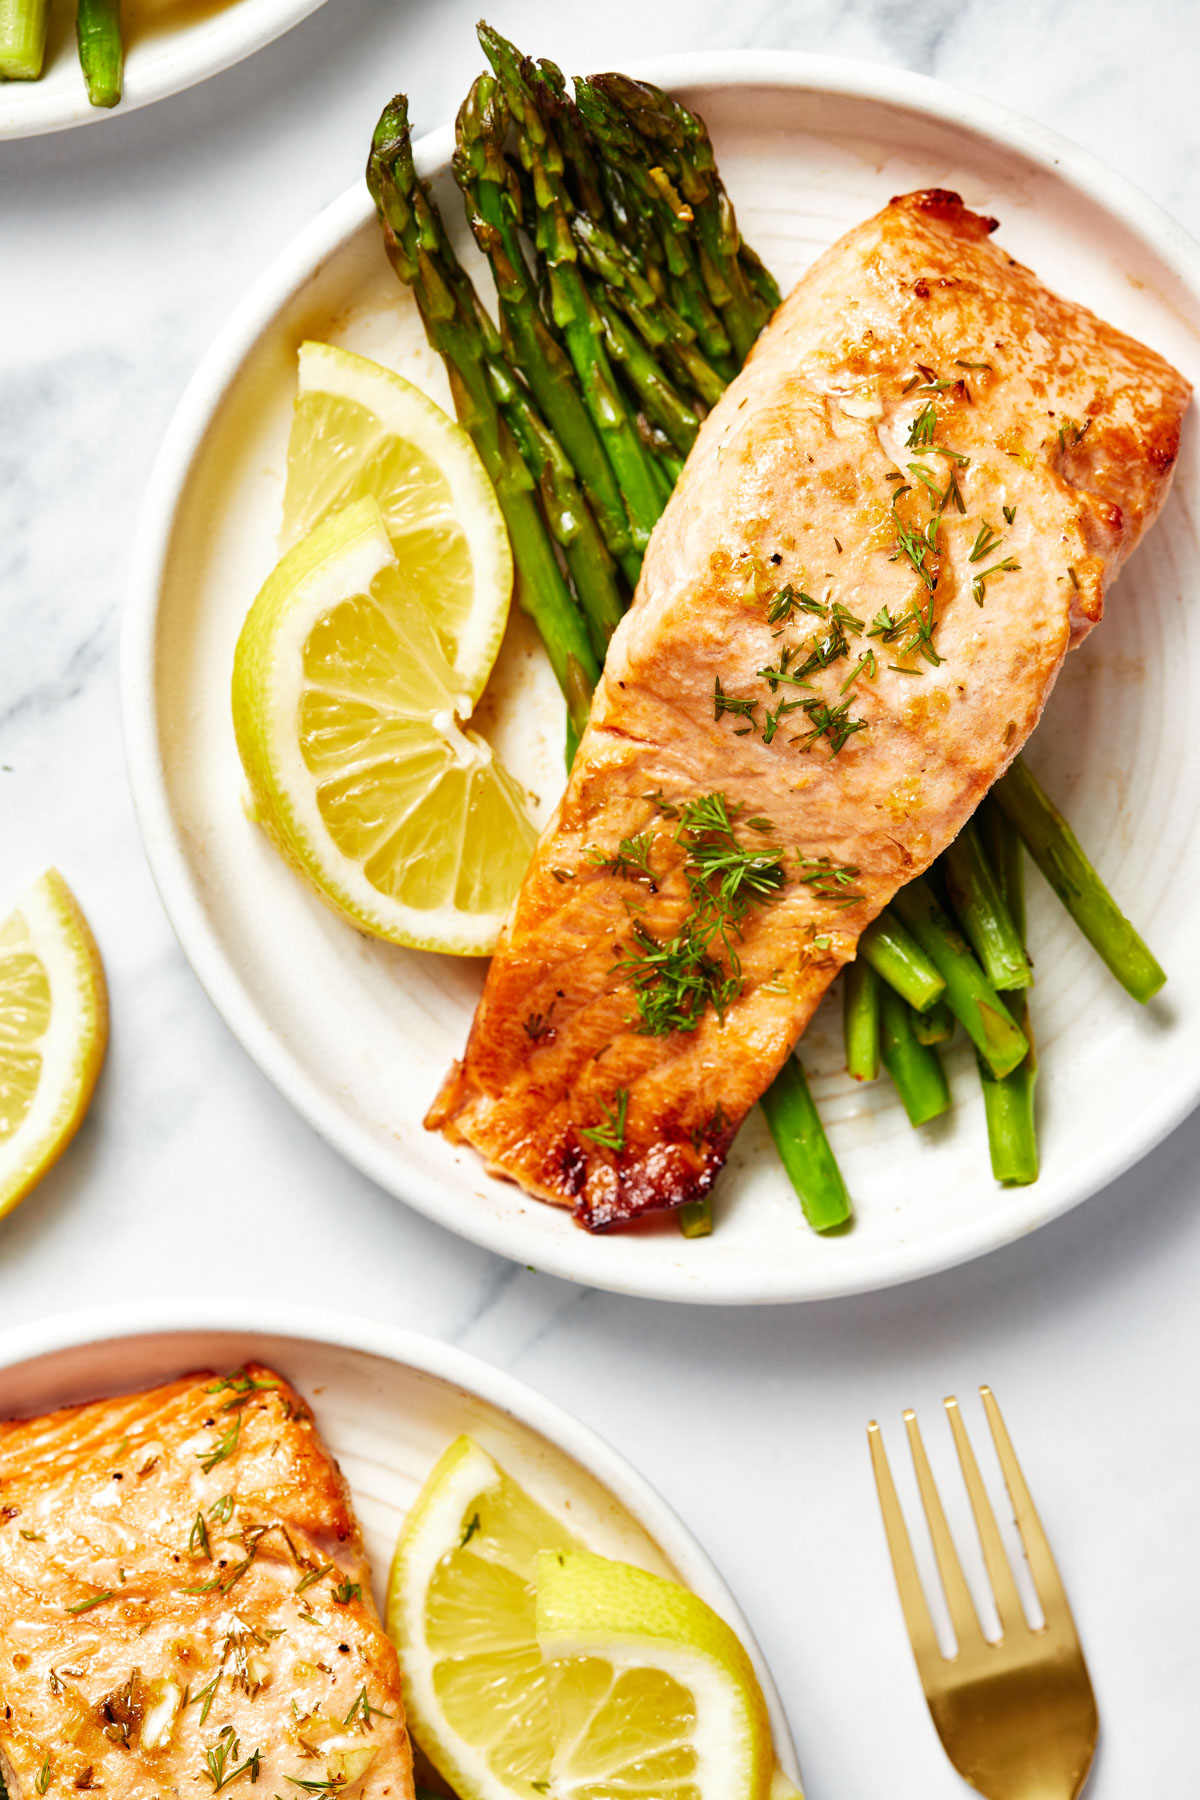 A close-up of two plates, each with a bed of asparagus topped with air fryer salmon, garnished with lemon slices.